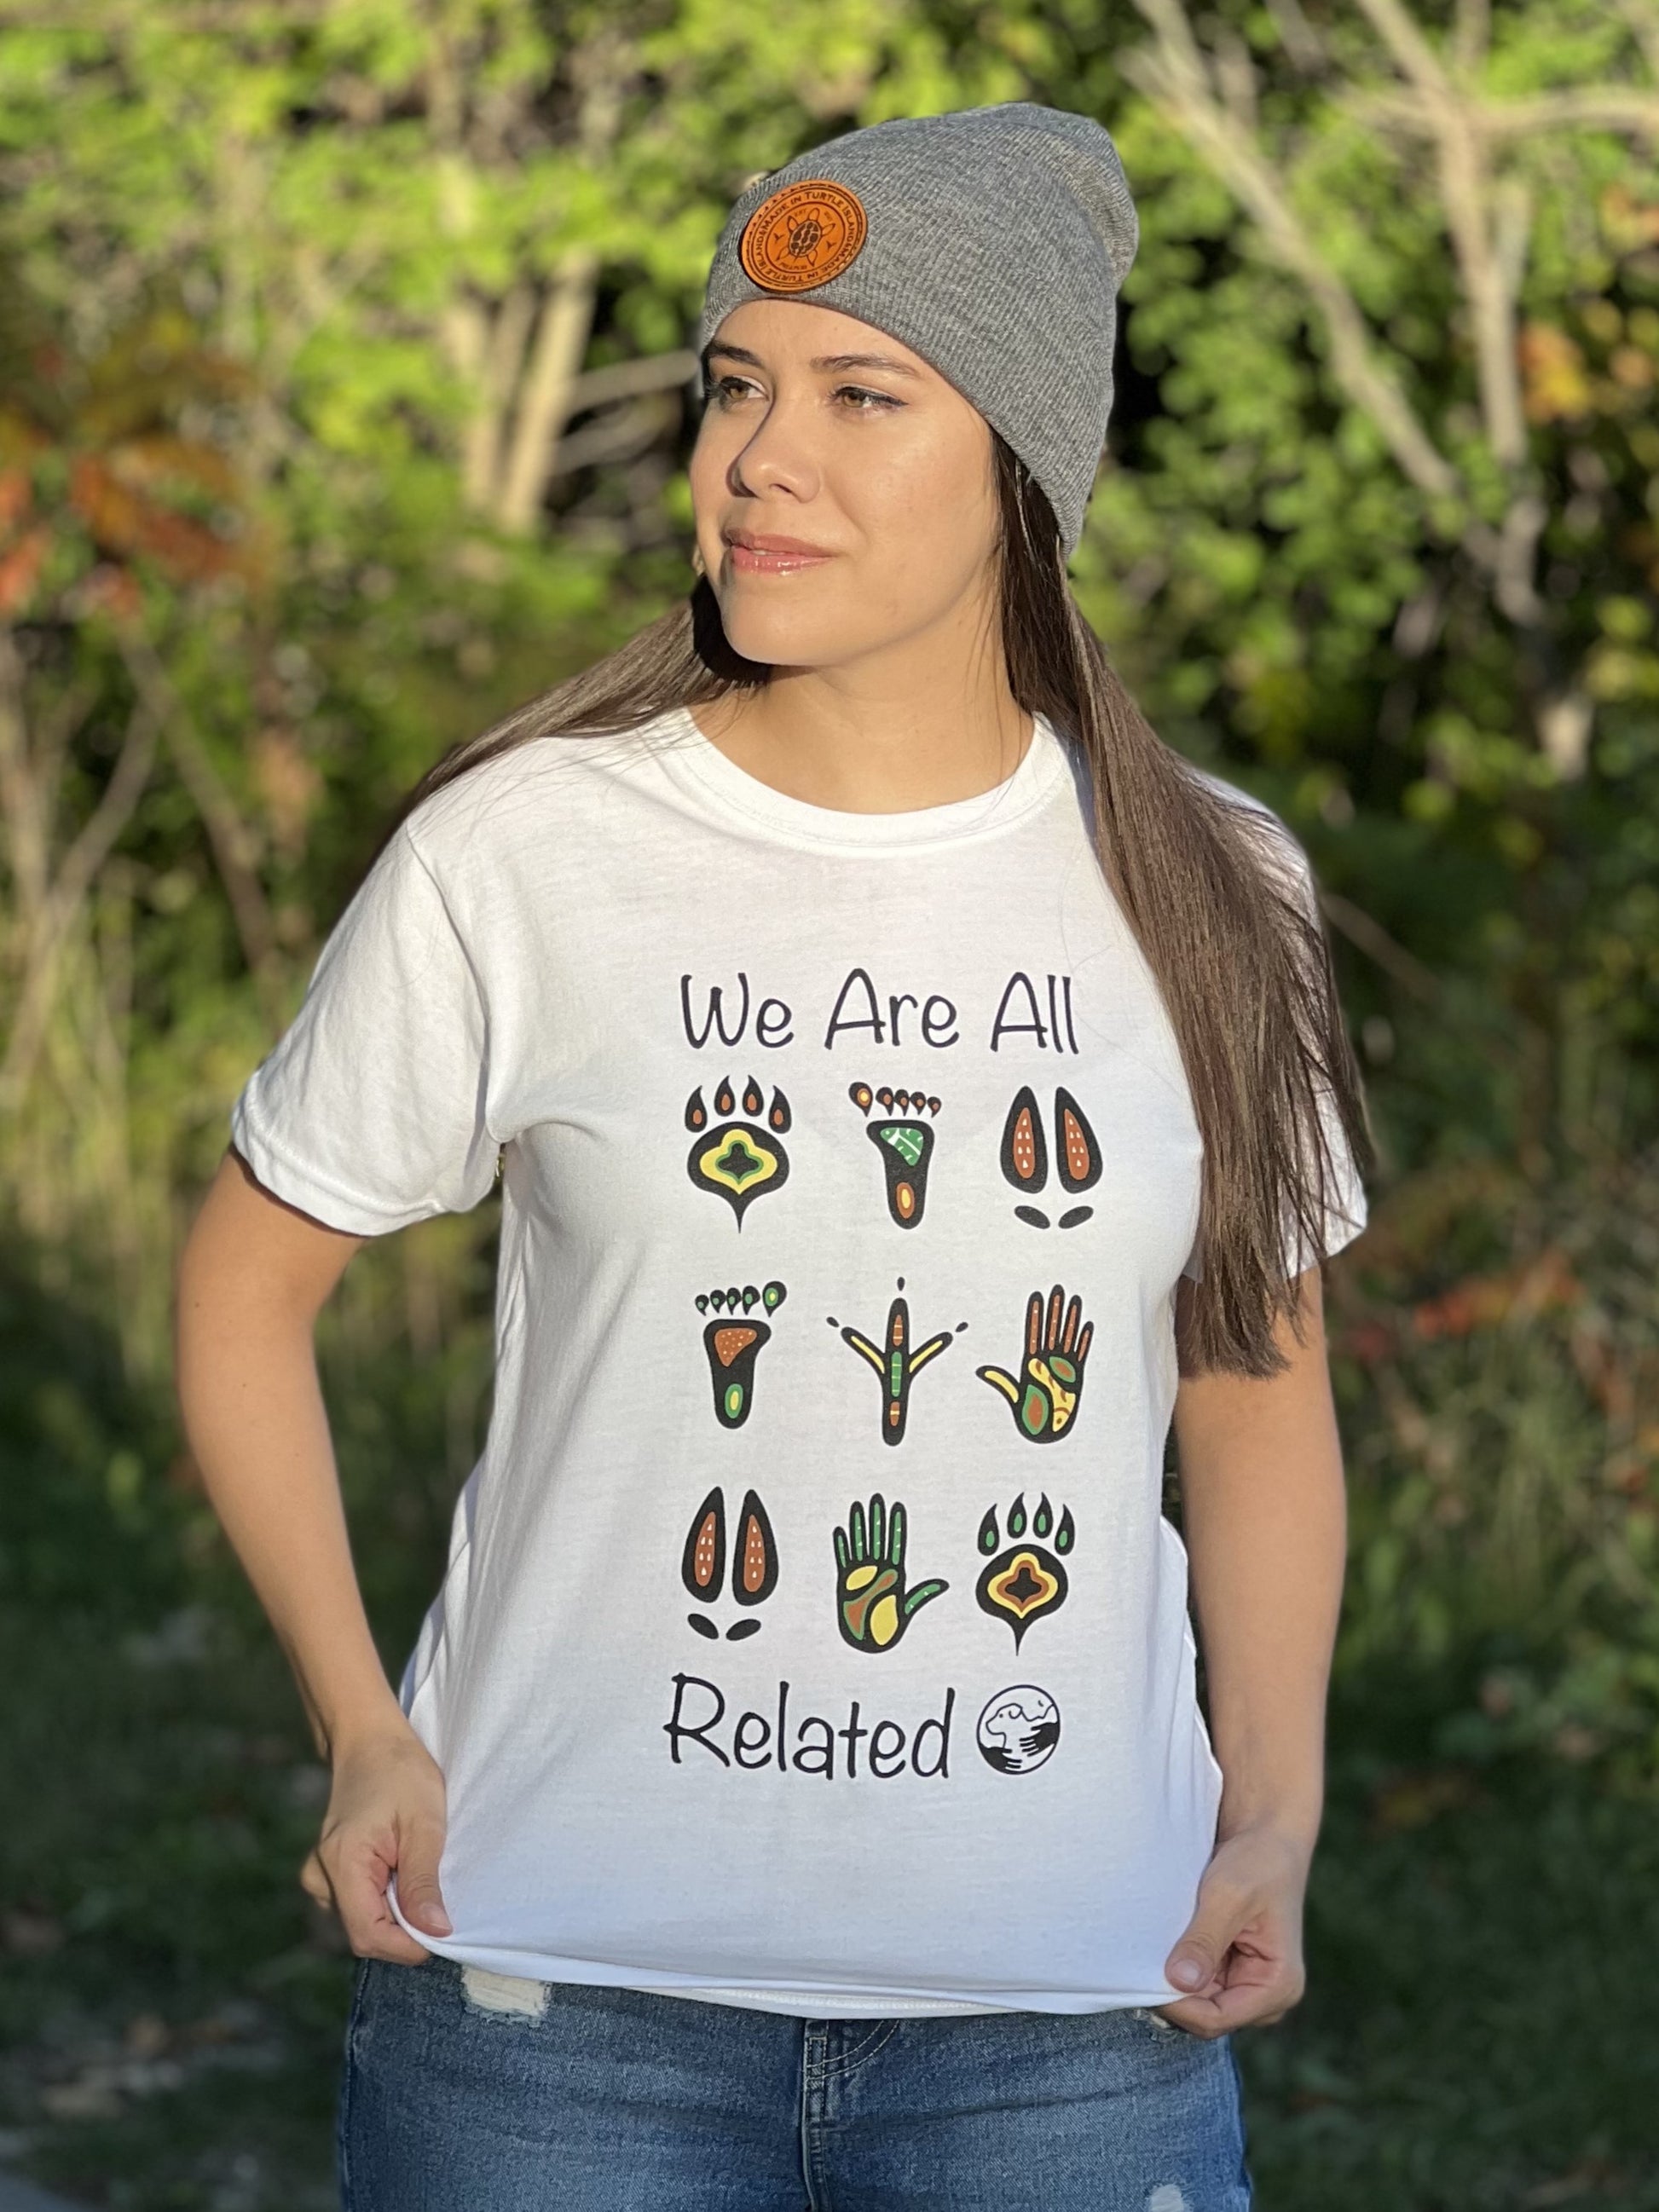 A woman wearing a white t-shirt with a mutlti-coloured print of stylized animal and human footprints. The words "We are all" are above the footprints "Related" is below the footprints with the One Health Partners logo beside. 